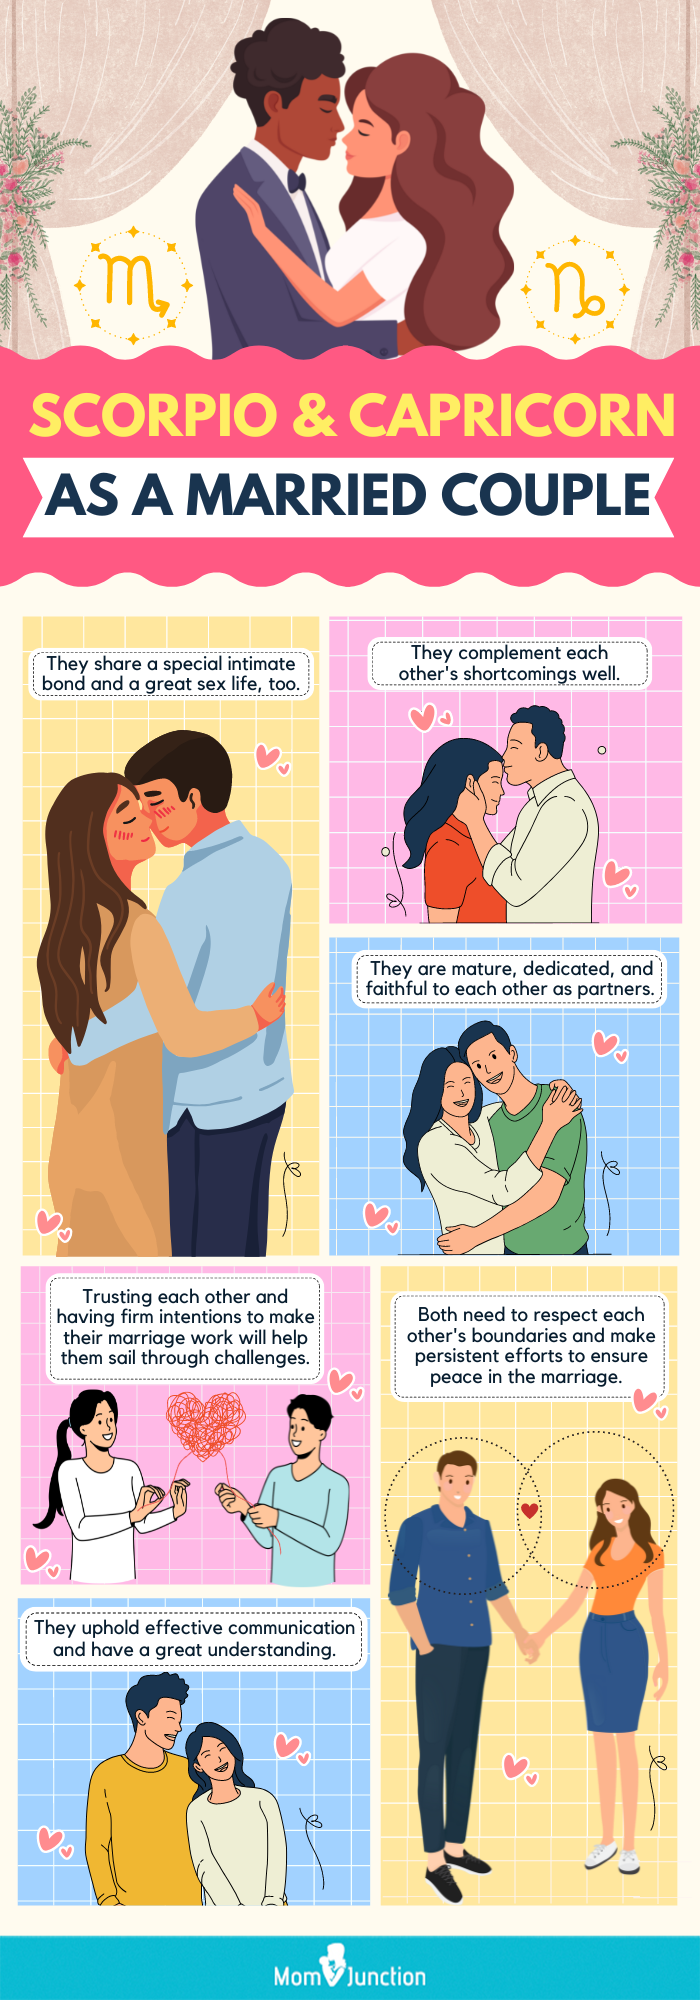 scorpio and capricorn as a married couple [infographic]